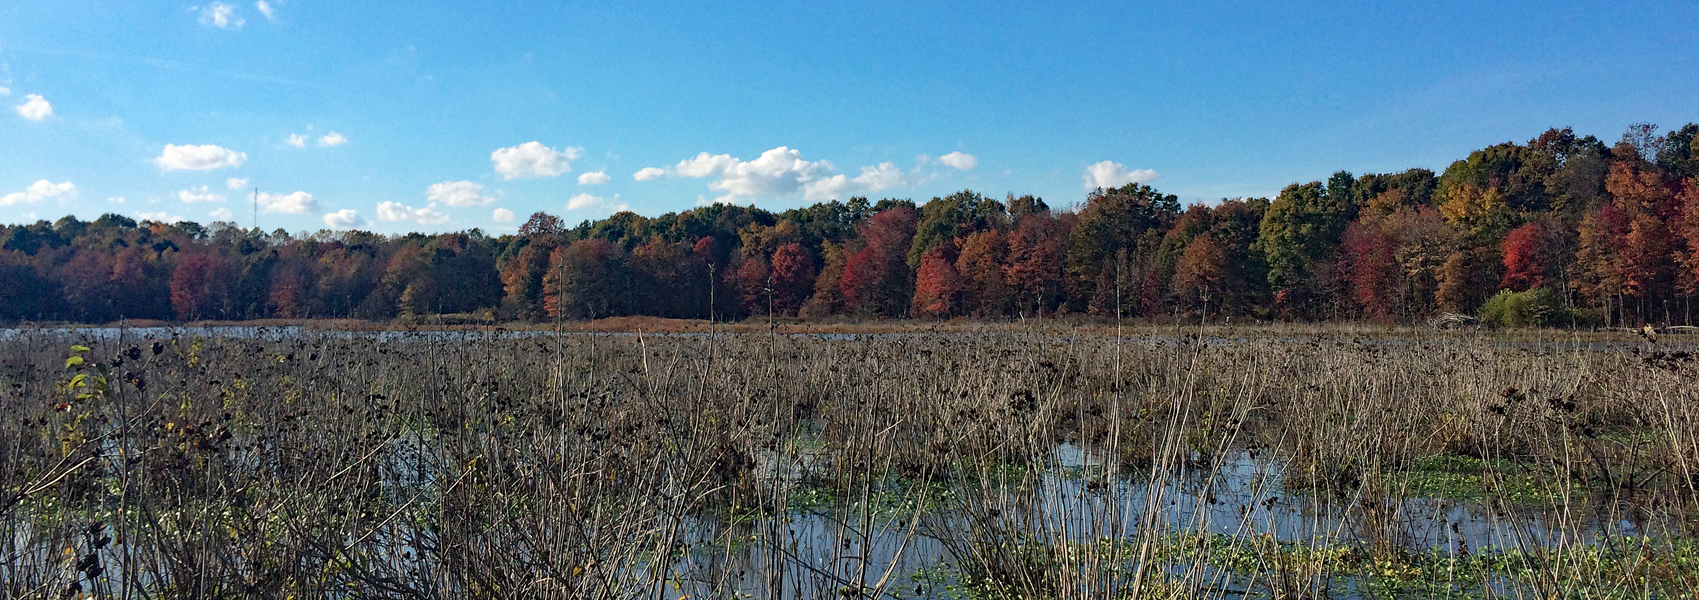 The wetlands filled with water